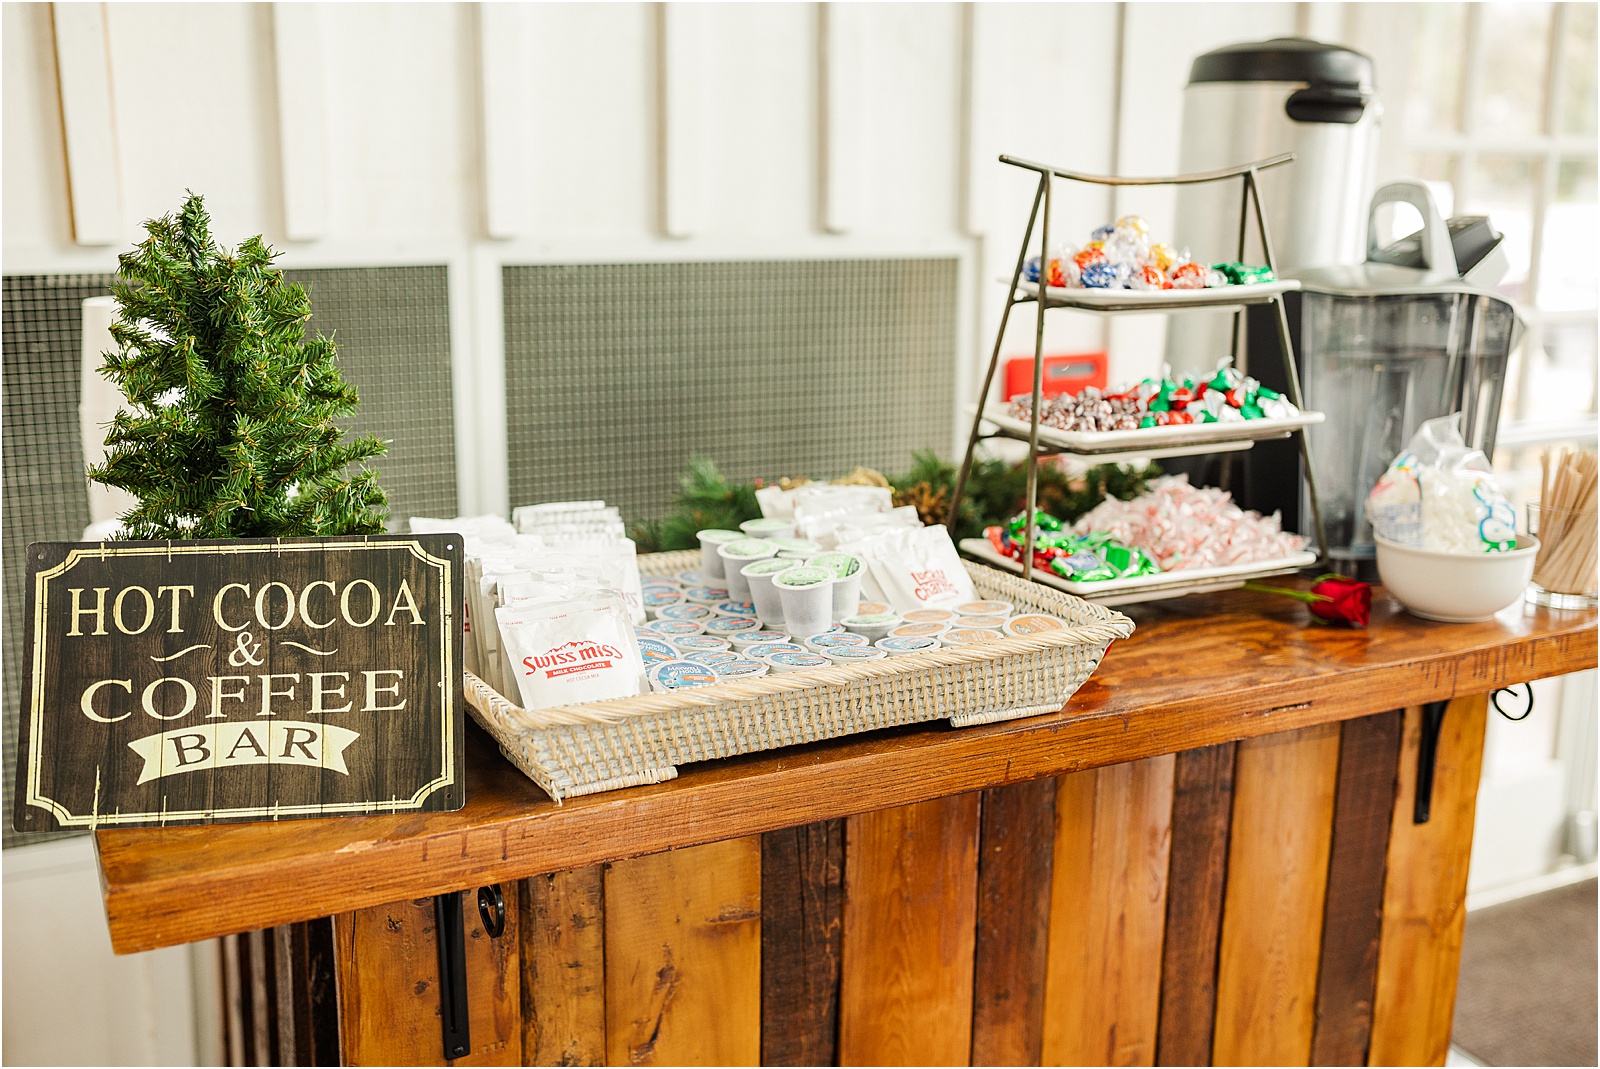 Coffee and hot cocoa bar at a wedding reception